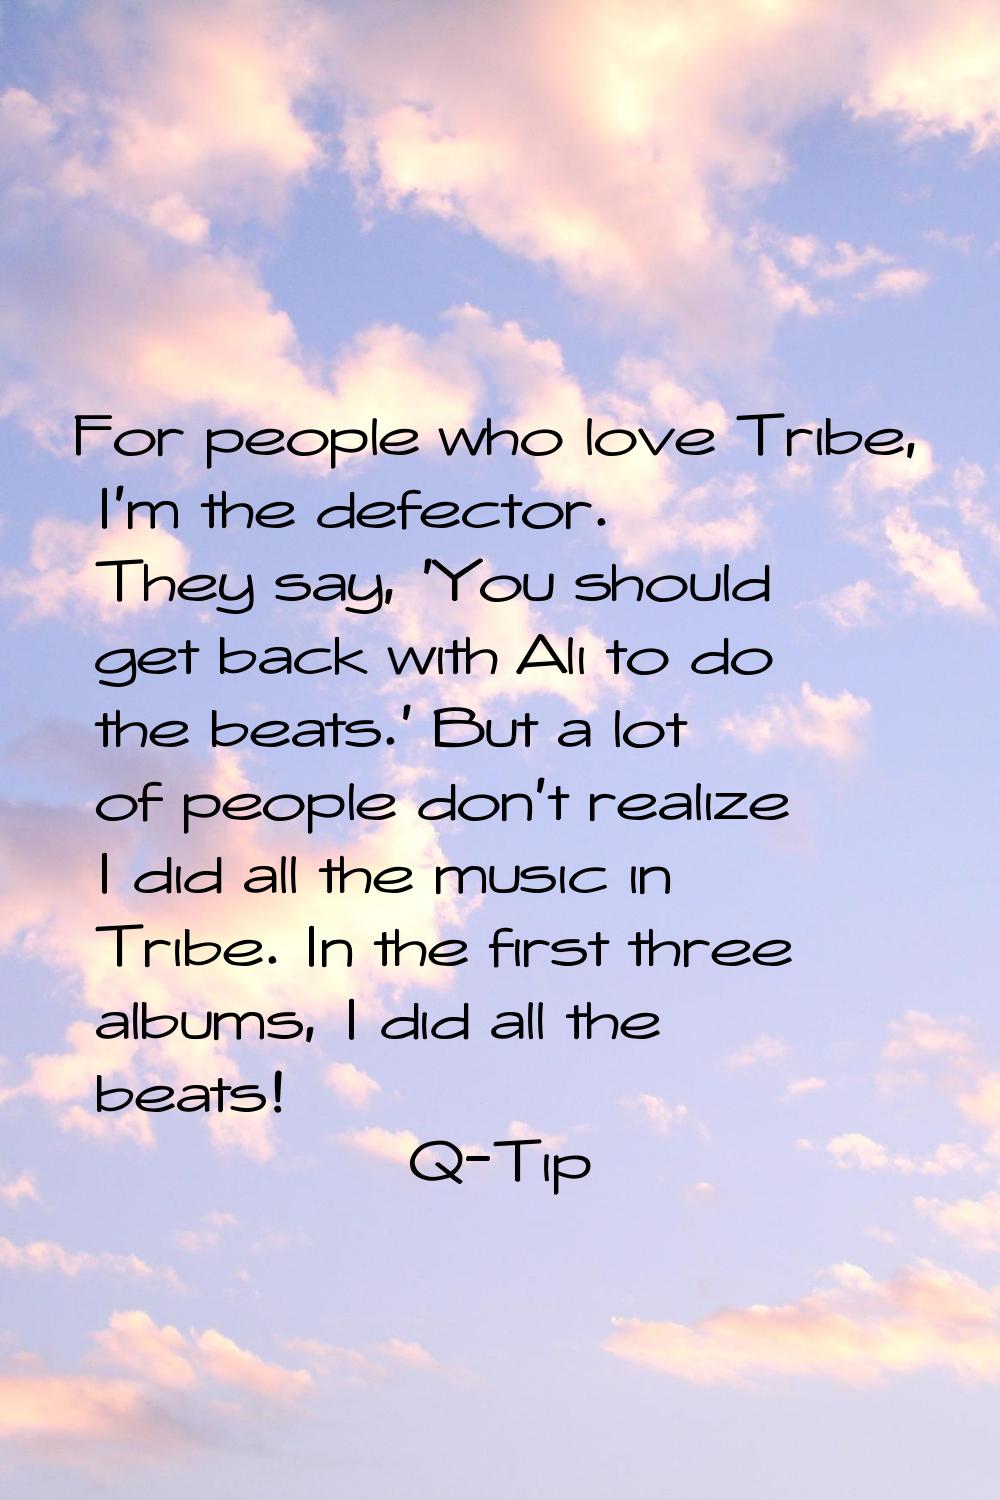 For people who love Tribe, I'm the defector. They say, 'You should get back with Ali to do the beat